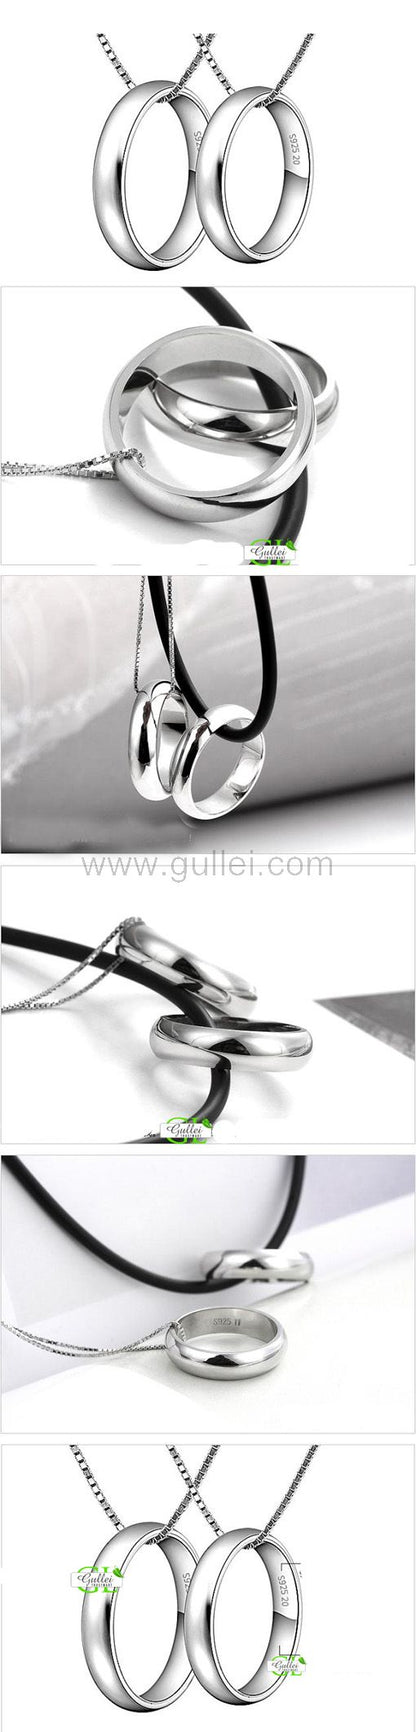 Engraved Sterling Silver Matching Rings Charm Necklaces Set for 2